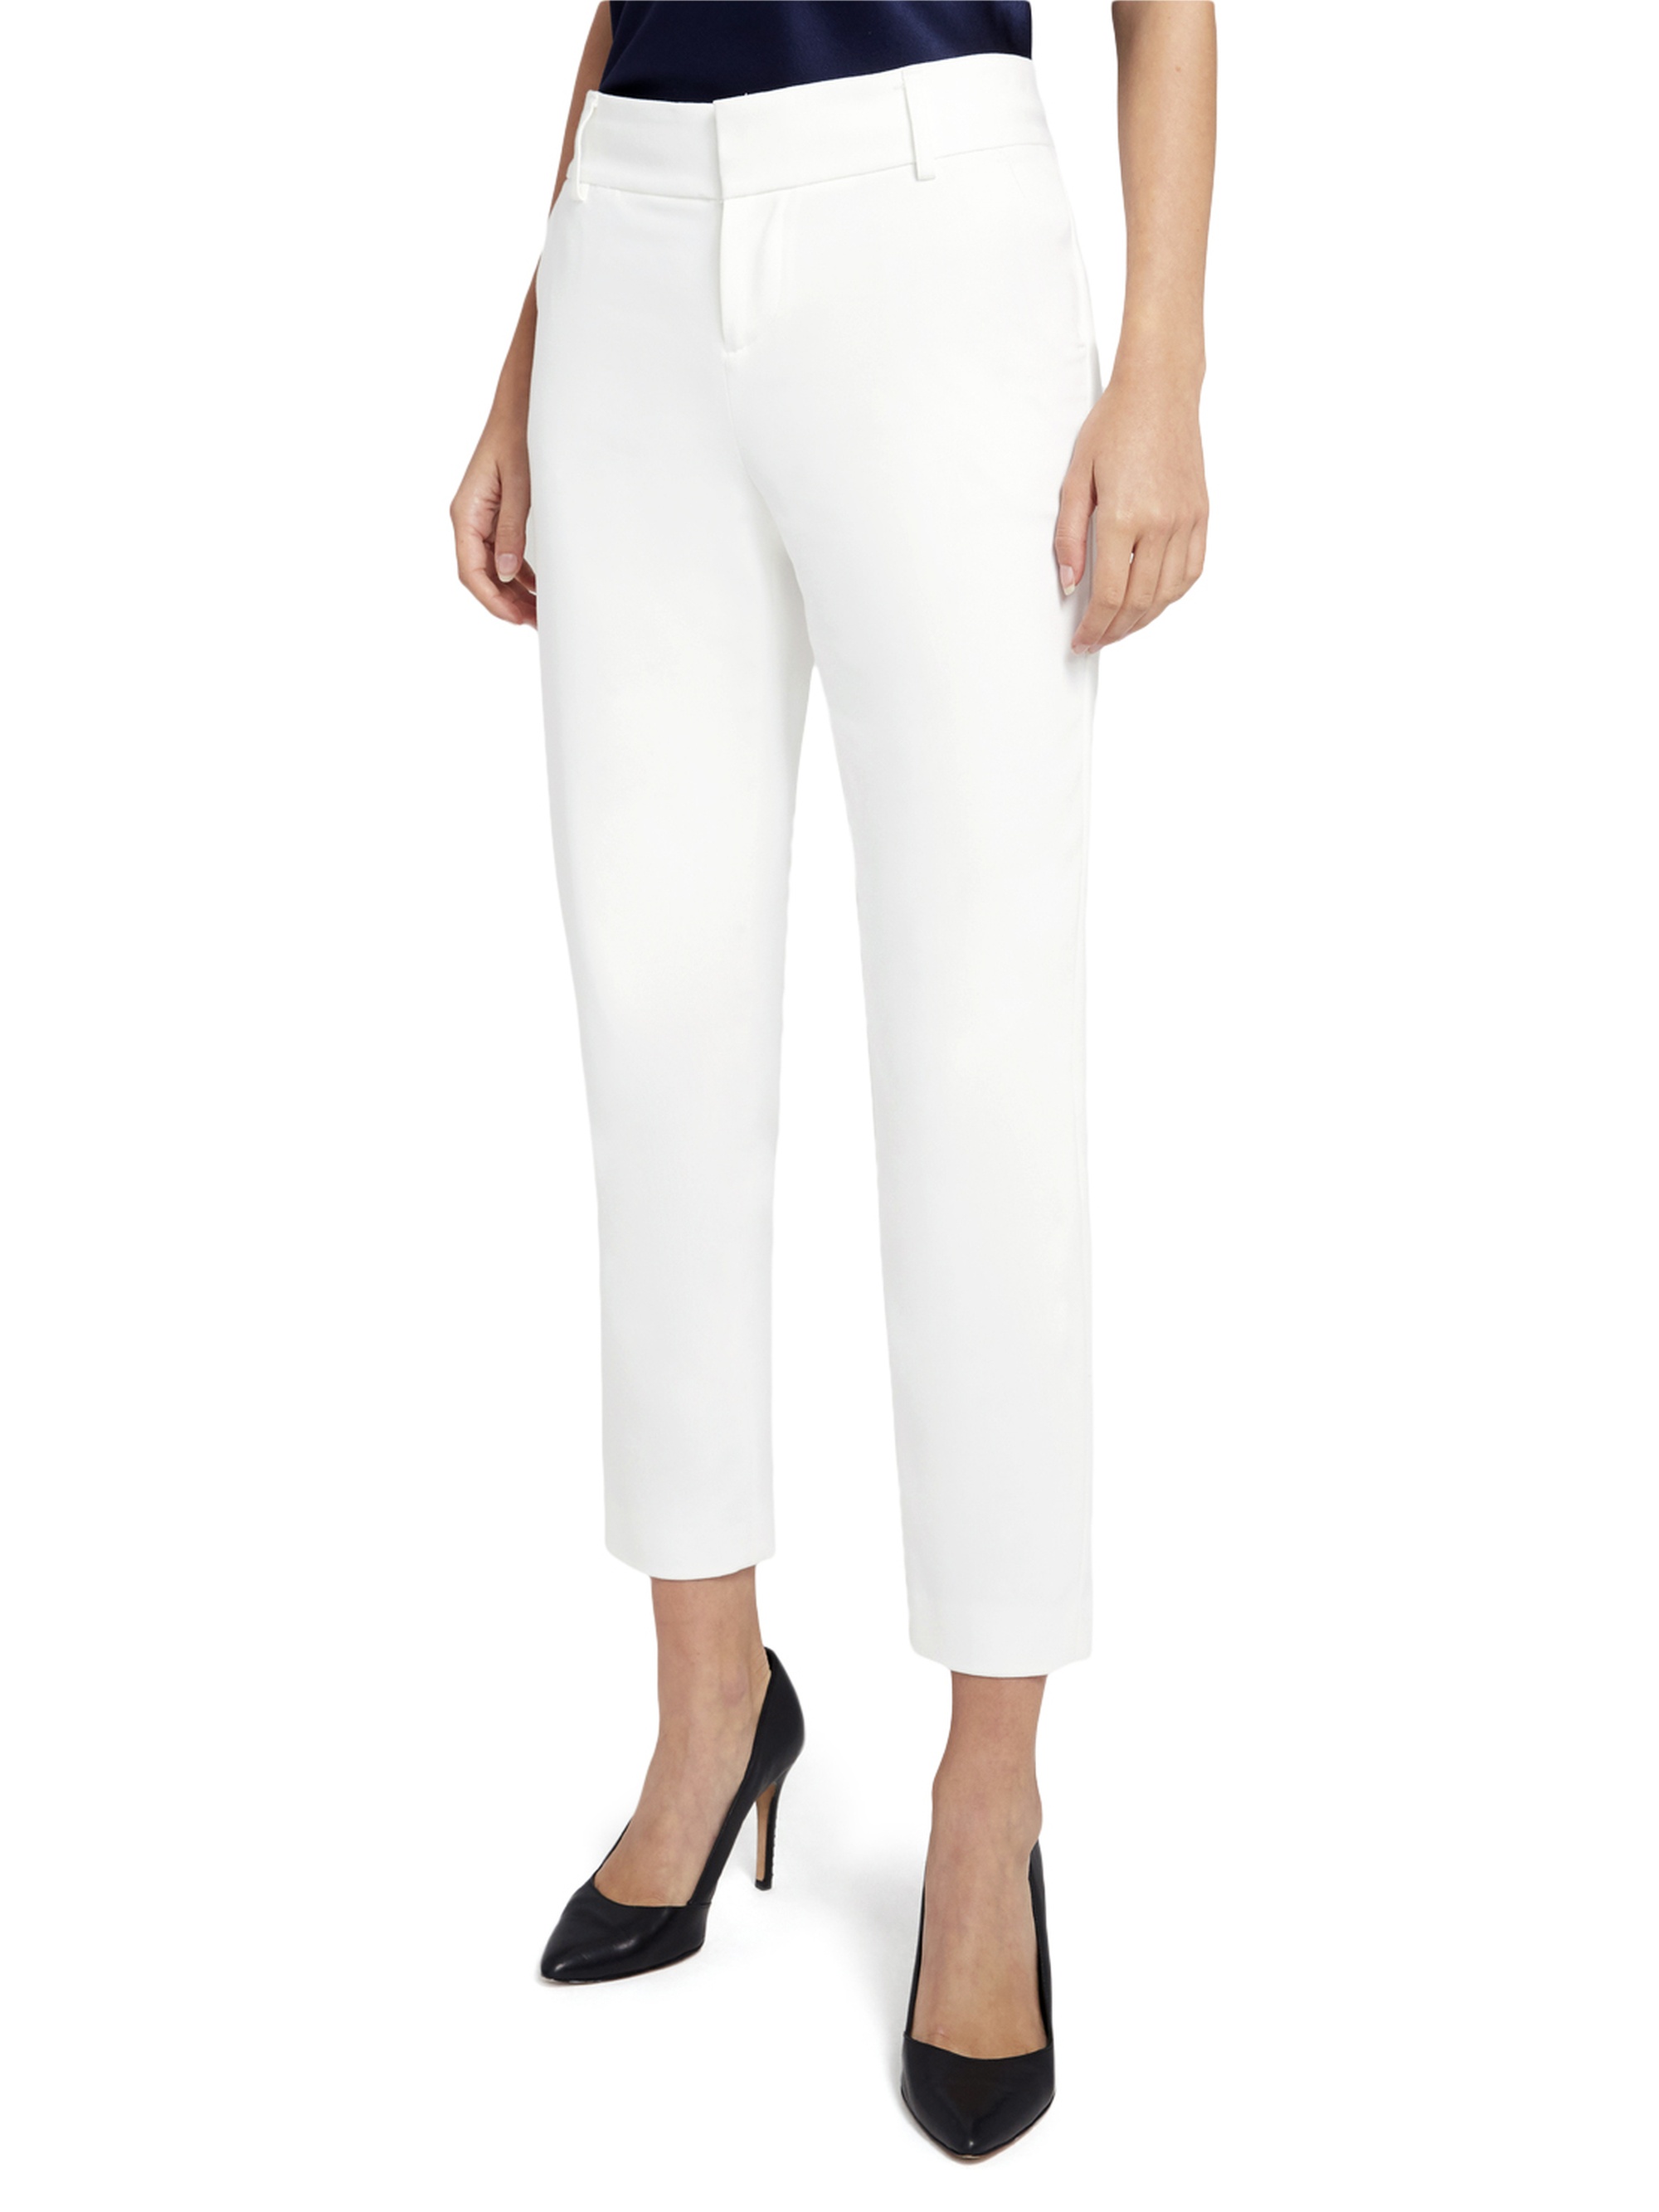 STACEY SLIM TROUSER - 2